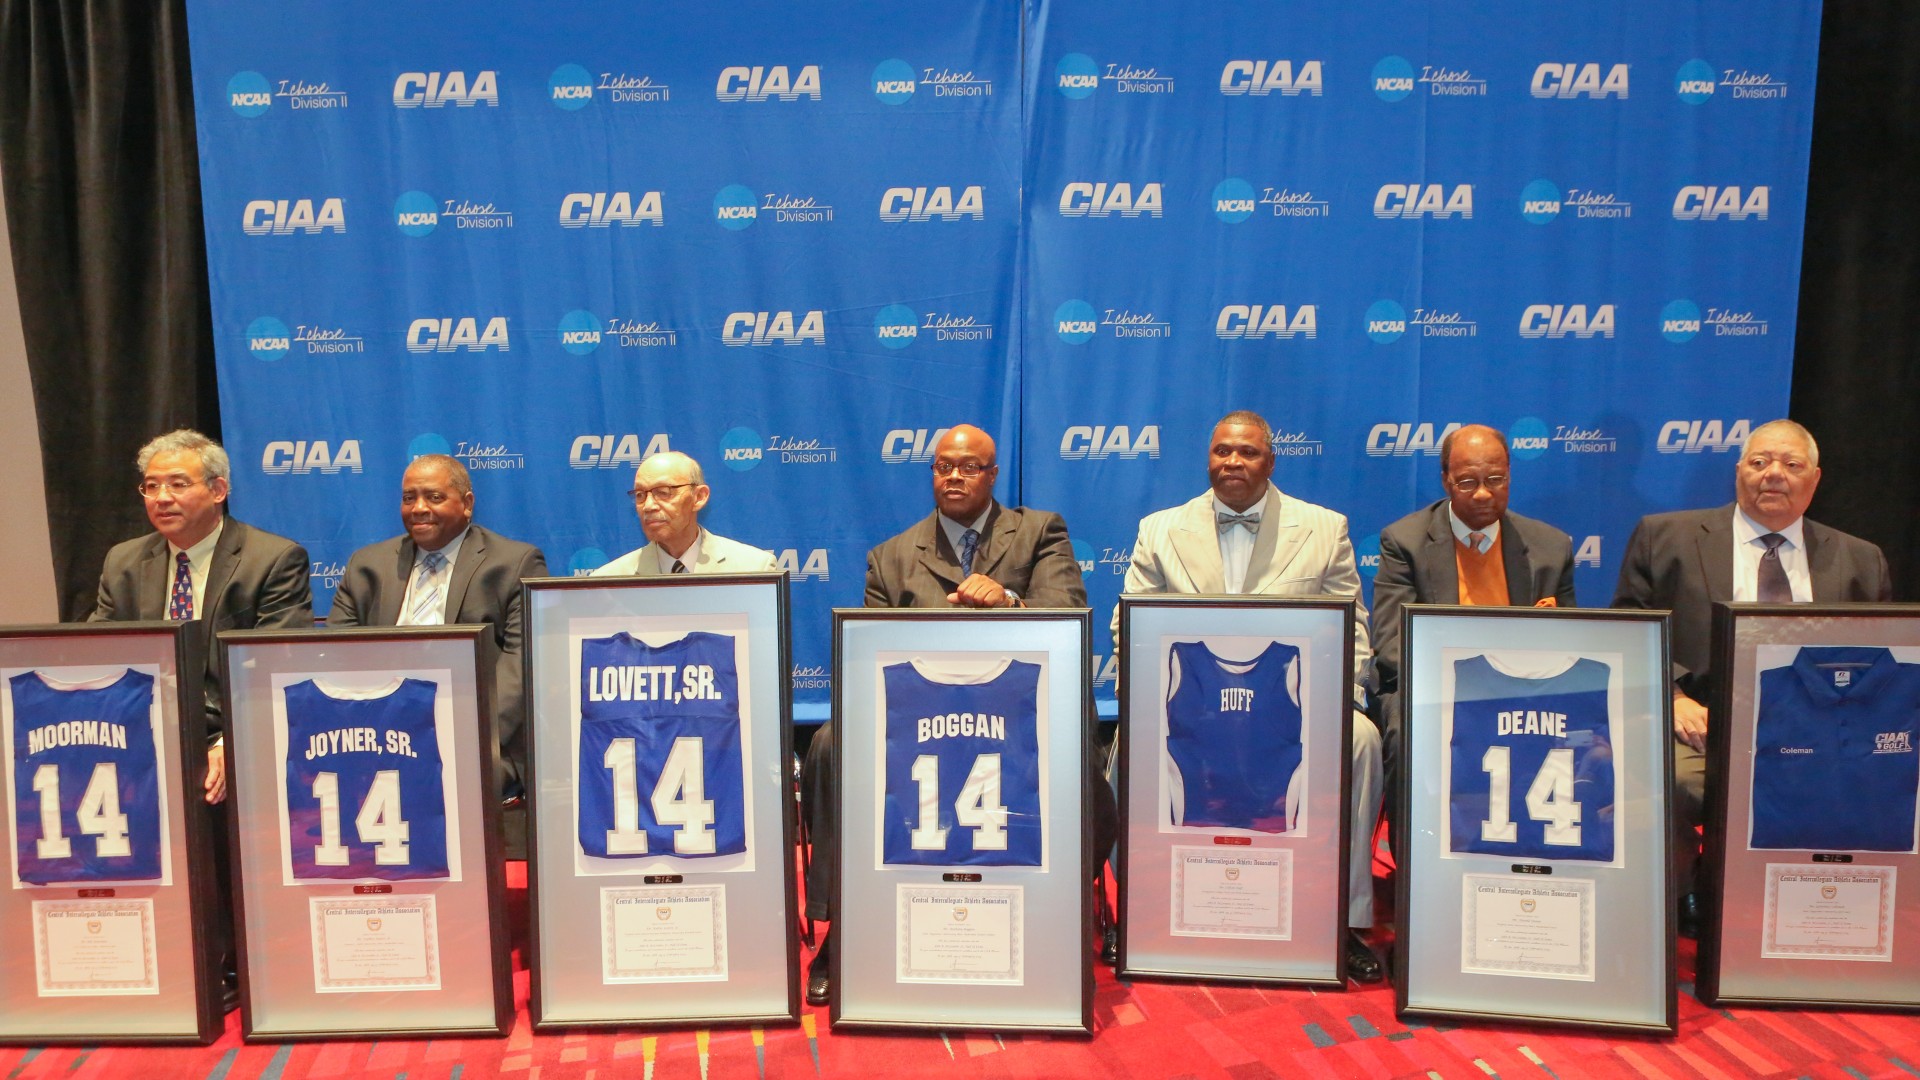 Steve Joyner Sr. with the other Hall of Fame recipients at the CIAA Hall of Fame Induction Ceremony of Steve Joyner Sr. 